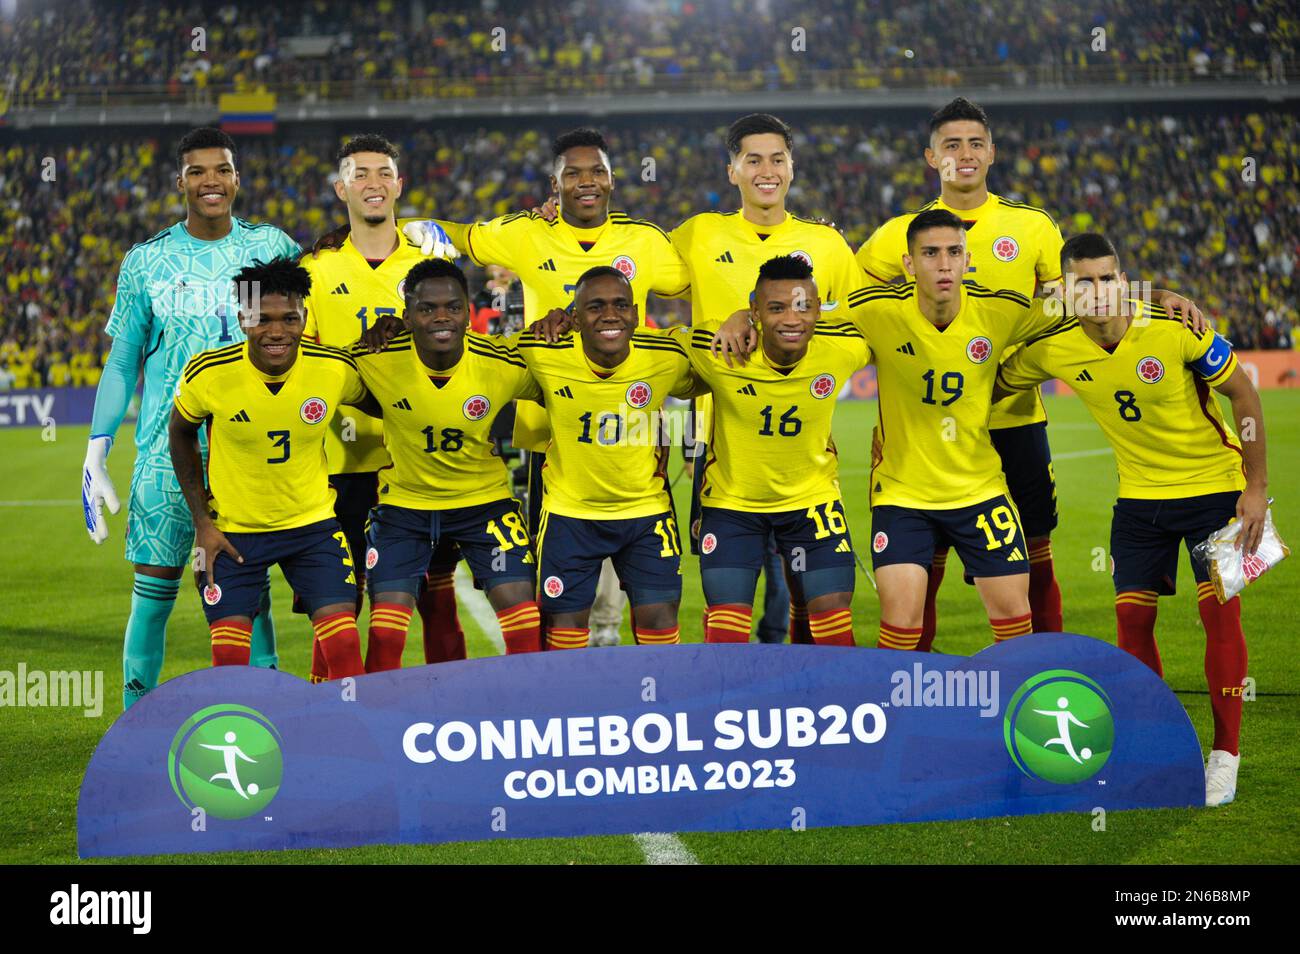 Bogota, Colombia on February 8, 2023. Colombia¿s U-20 team during the CONMEBOL South American U-20 Colombia tournament match between Colombia and Brazil, in Bogota, Colombia on February 8, 2023. Photo by: Chepa Beltran/Long Visual Press Stock Photo